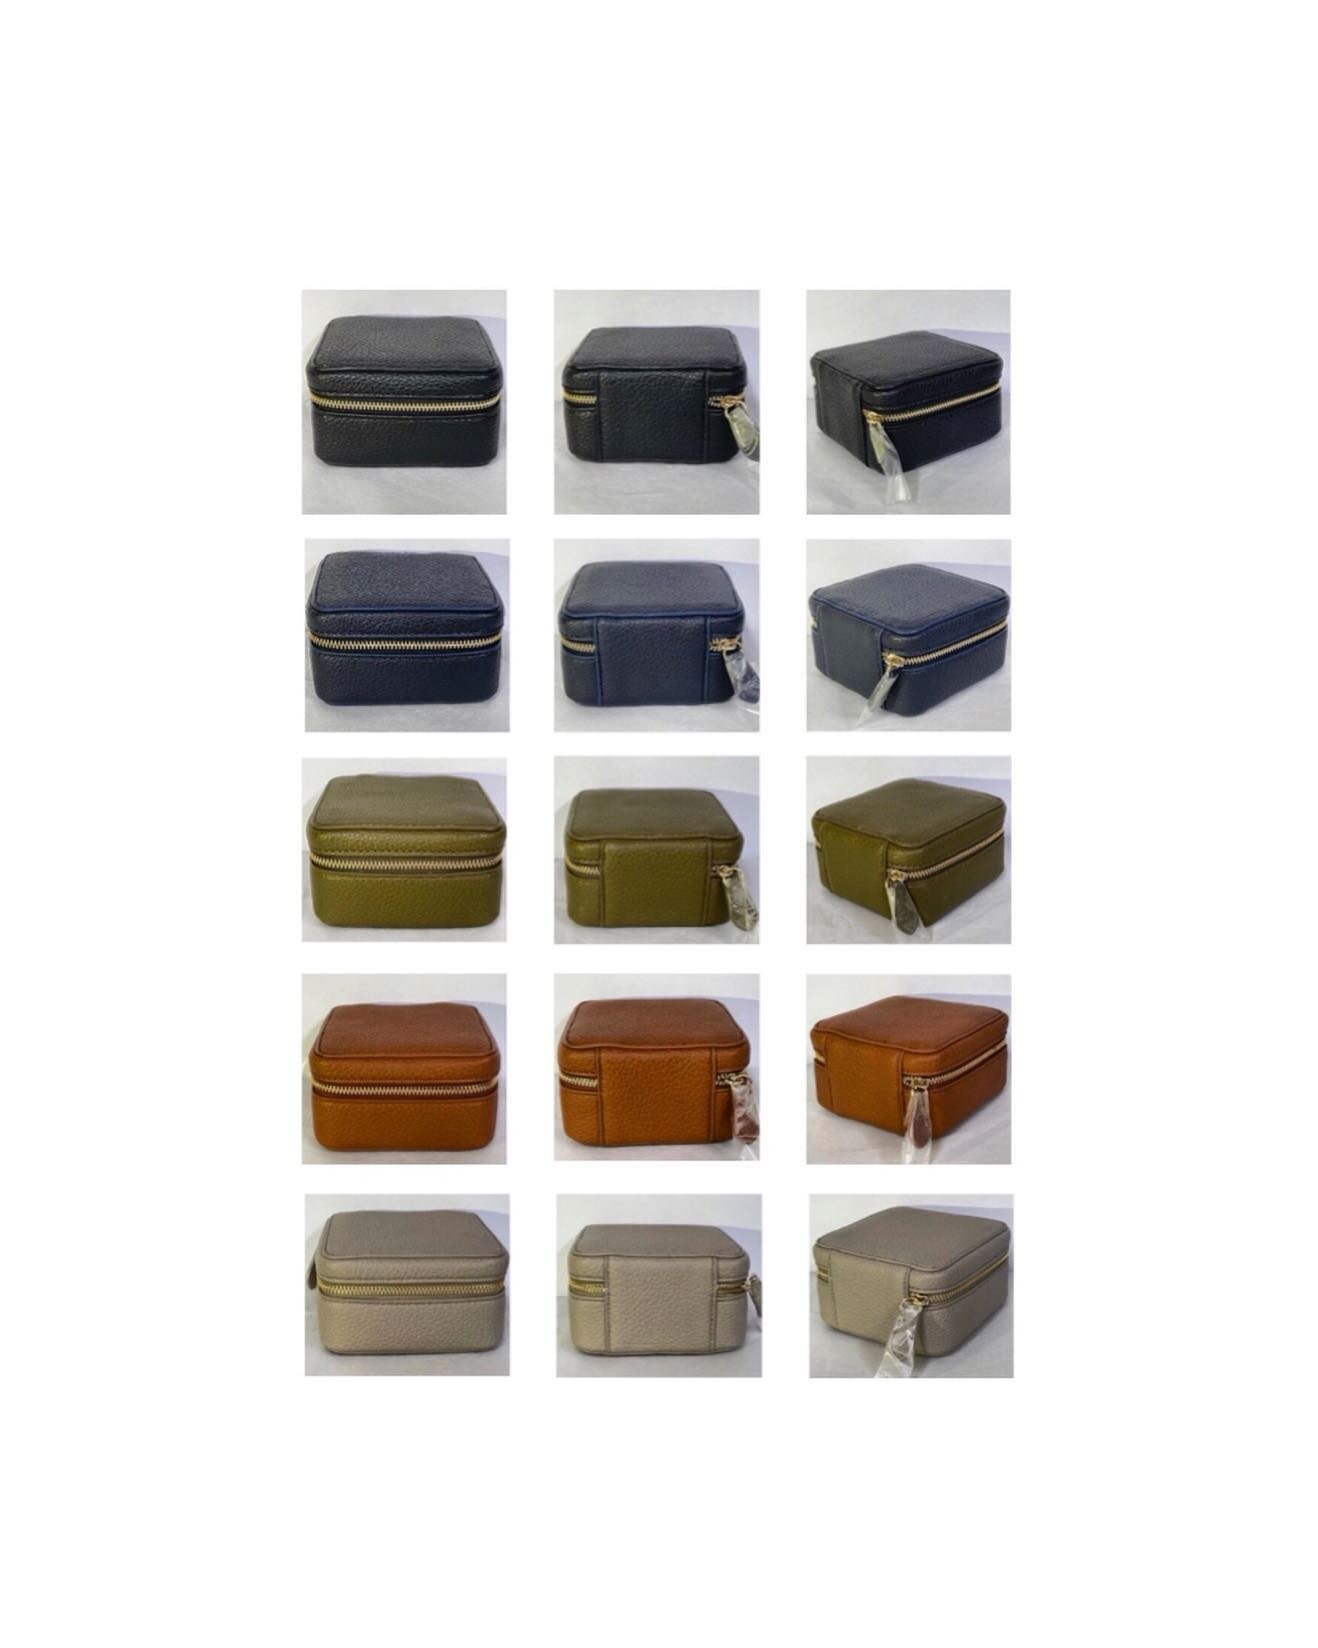 #smallleathergoods #luxury #leathercraft #jewelrycase #color #naturalcolor #accessories #leather